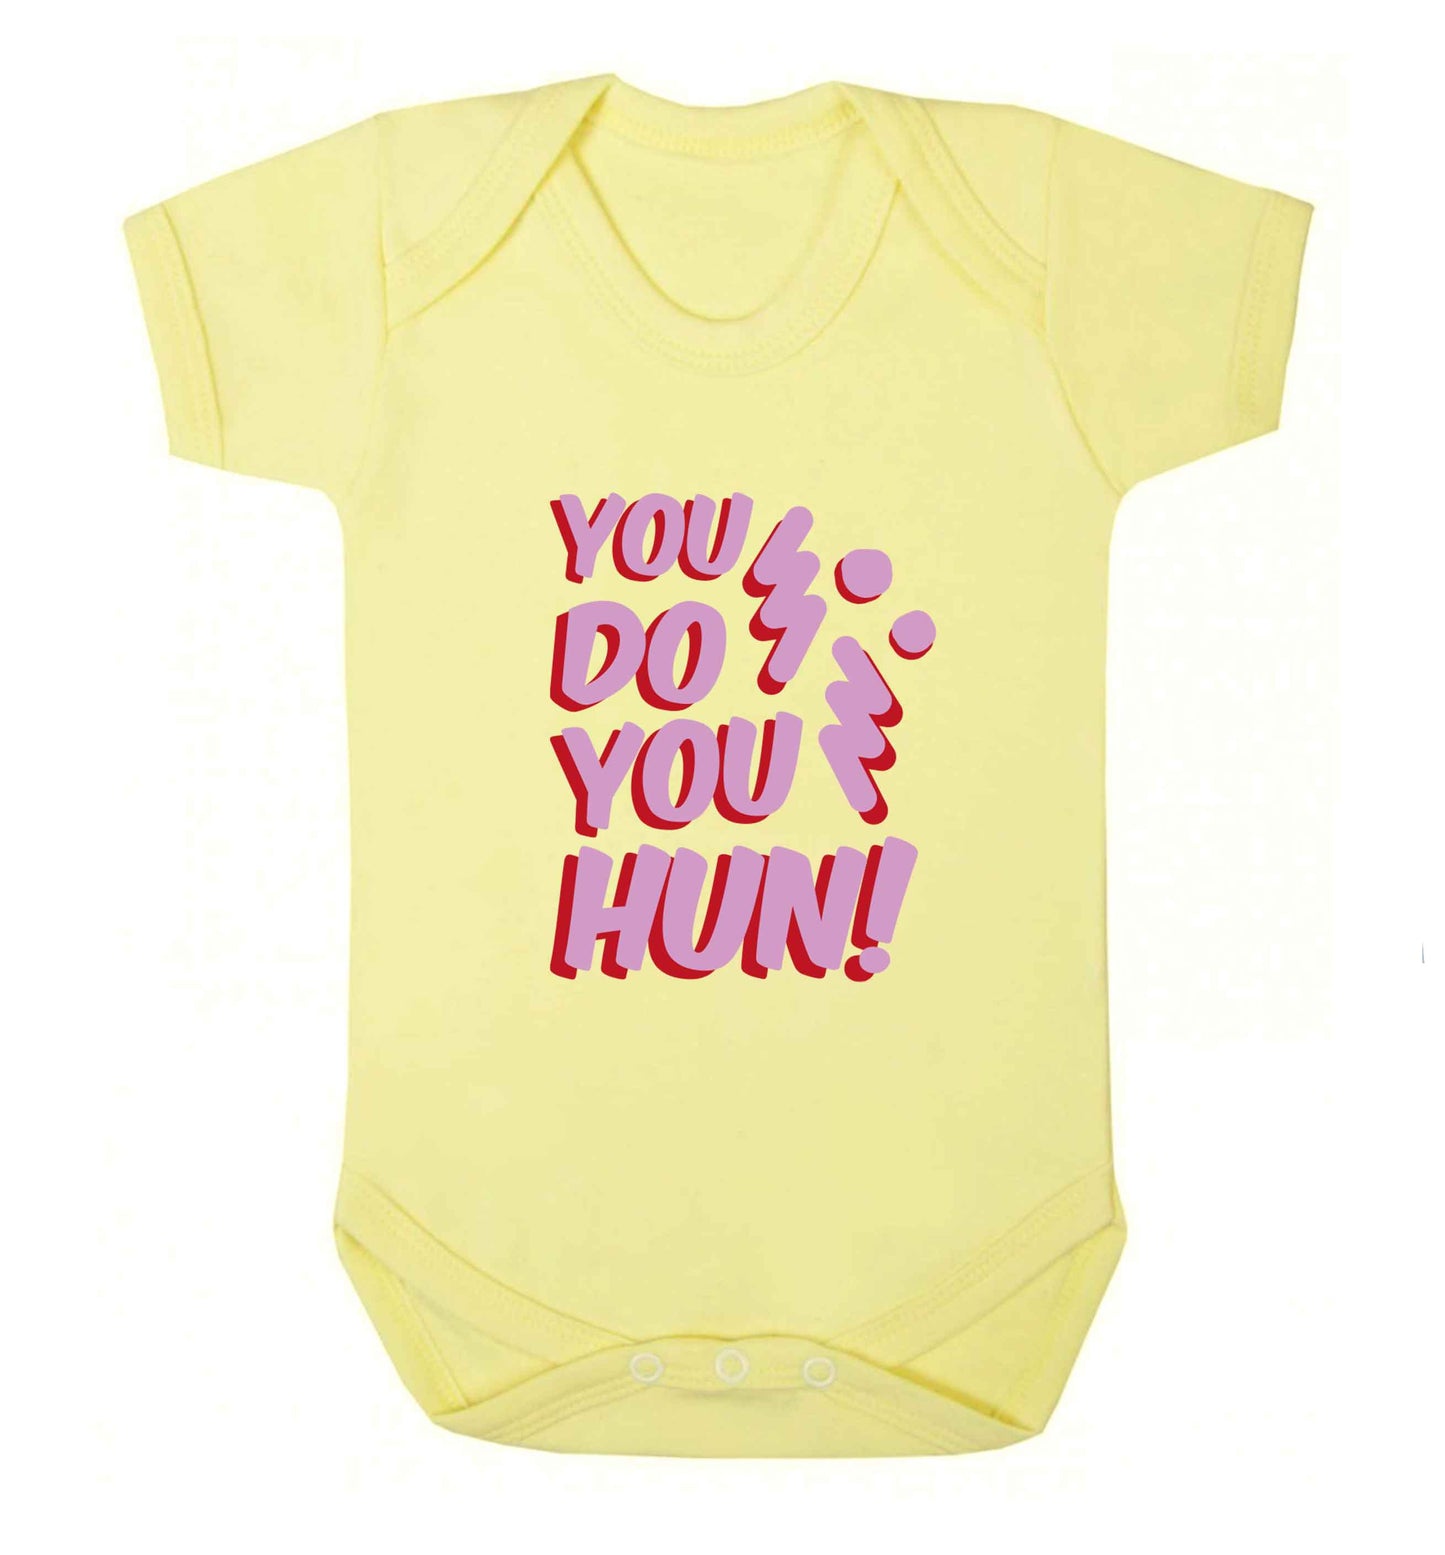 You do you hun baby vest pale yellow 18-24 months